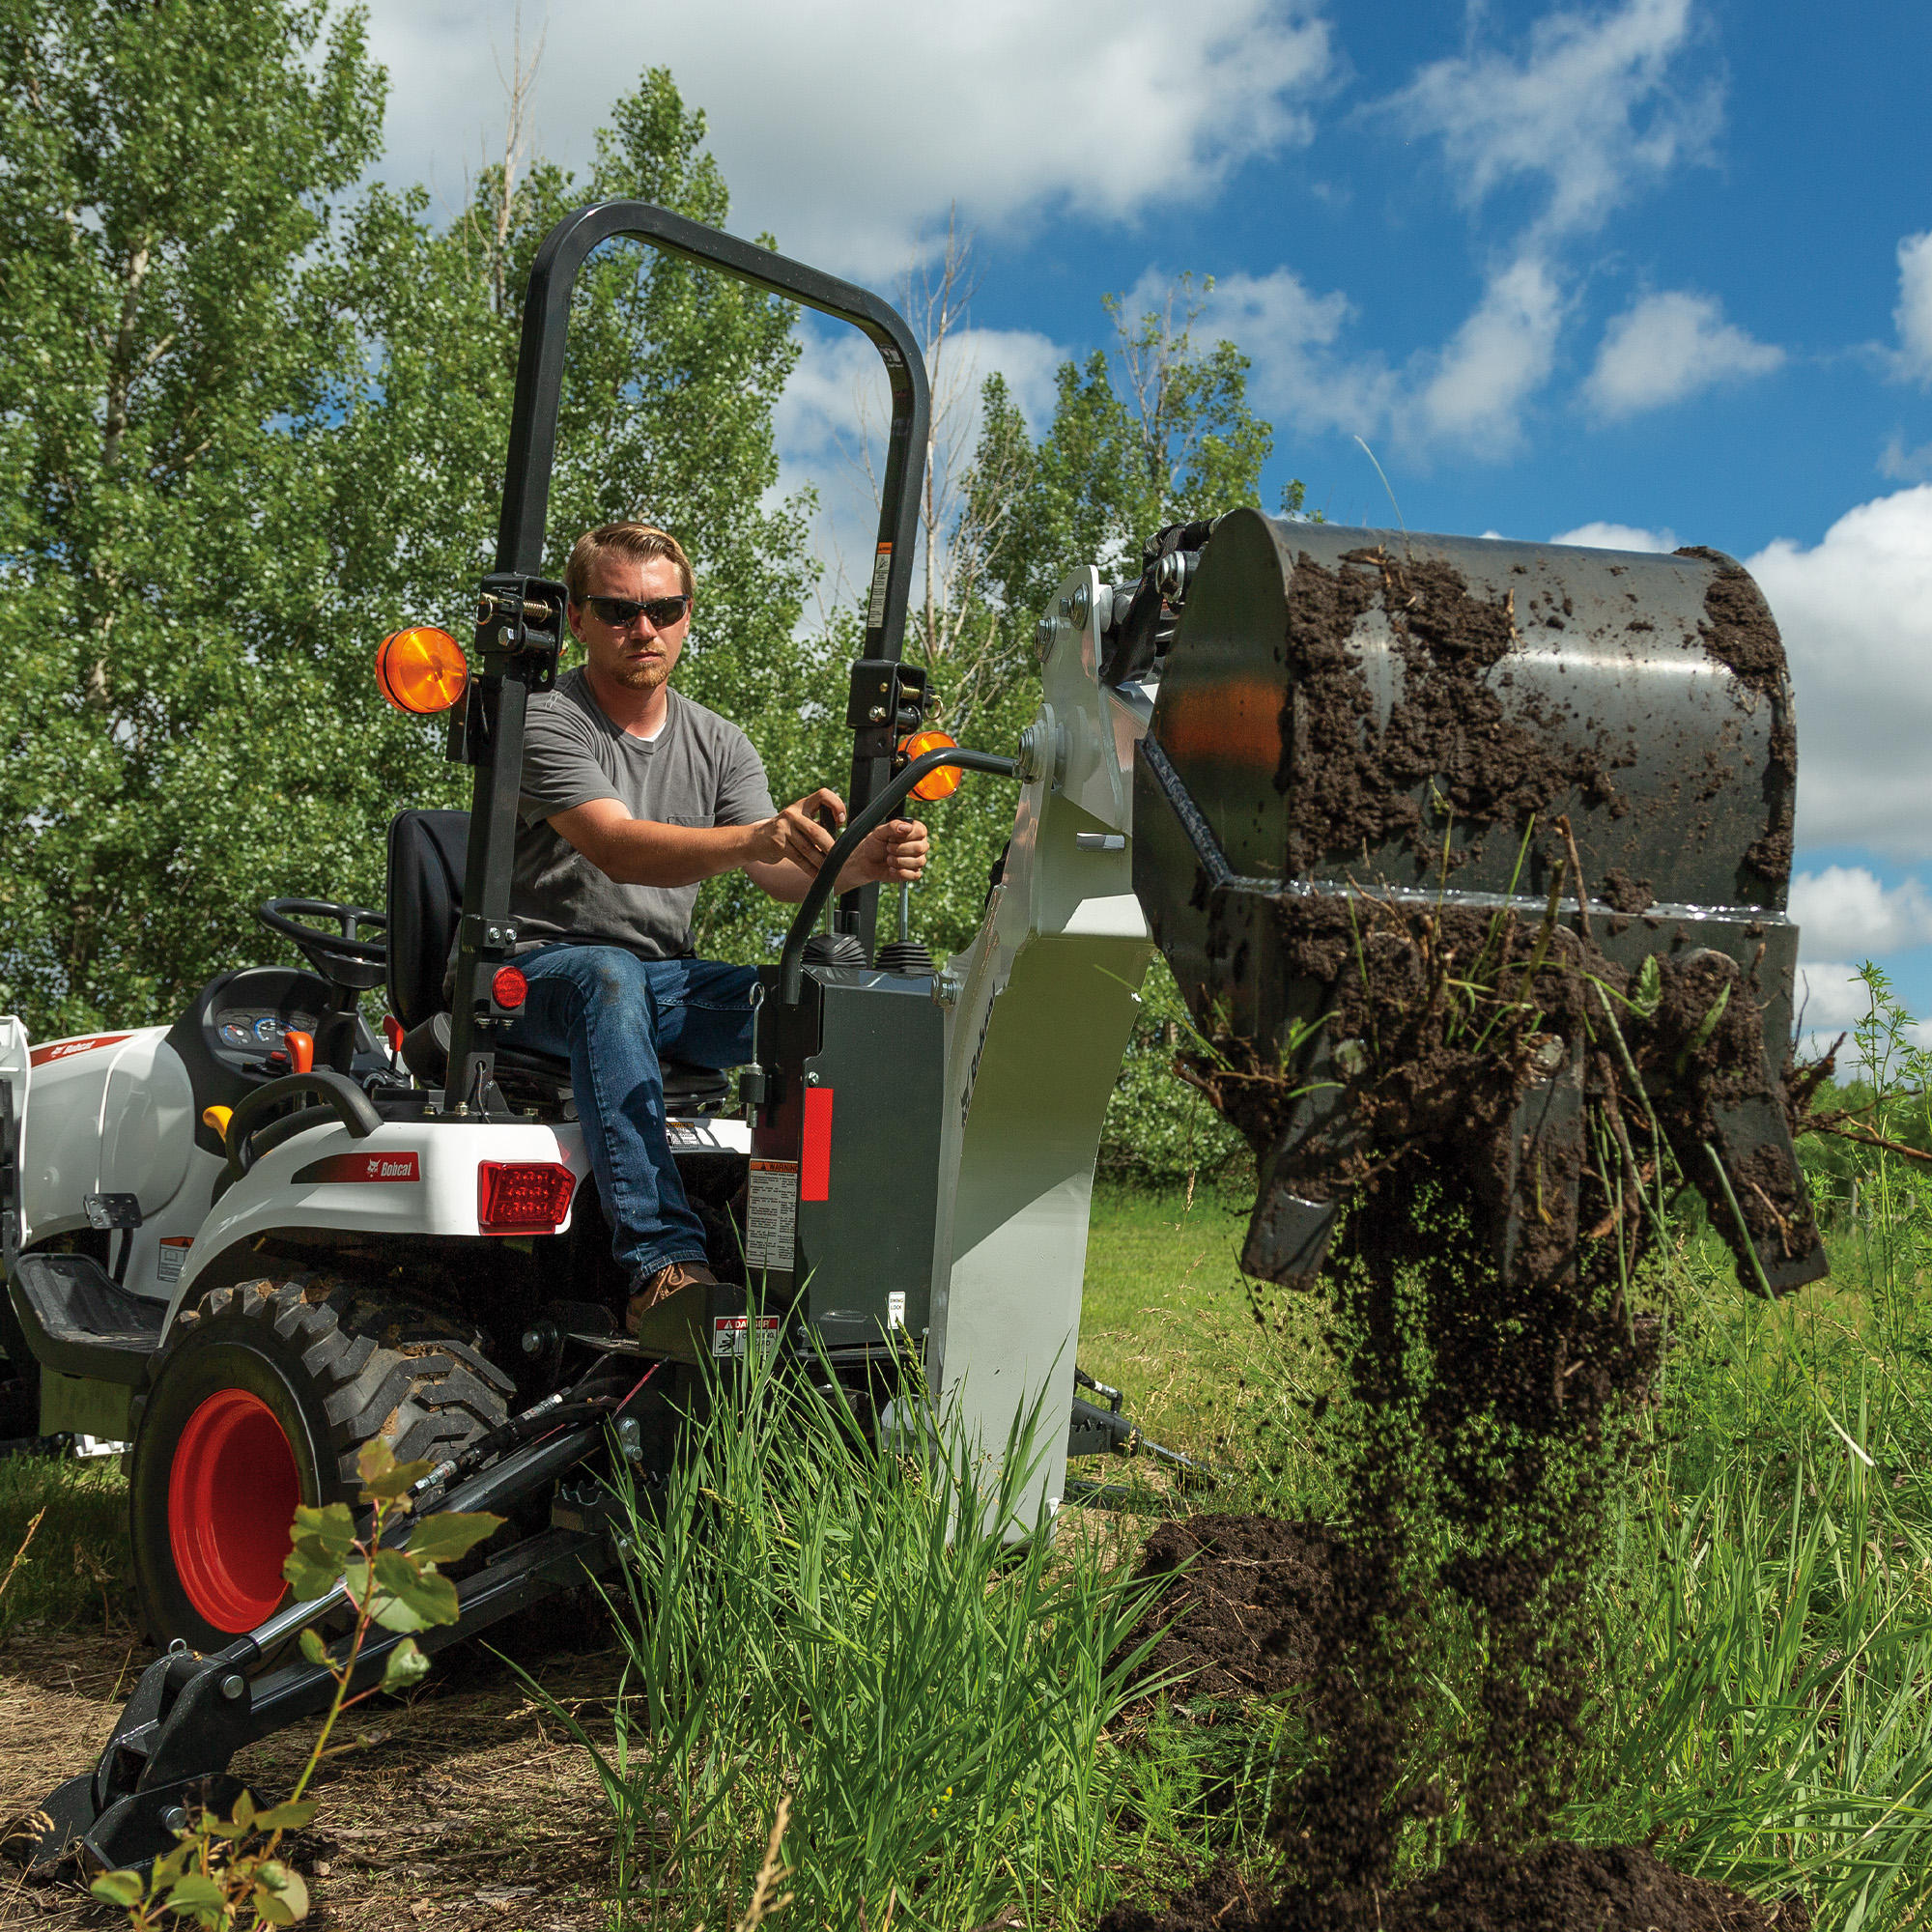 The Bobcat CT1021 compact tractor and backhoe implement